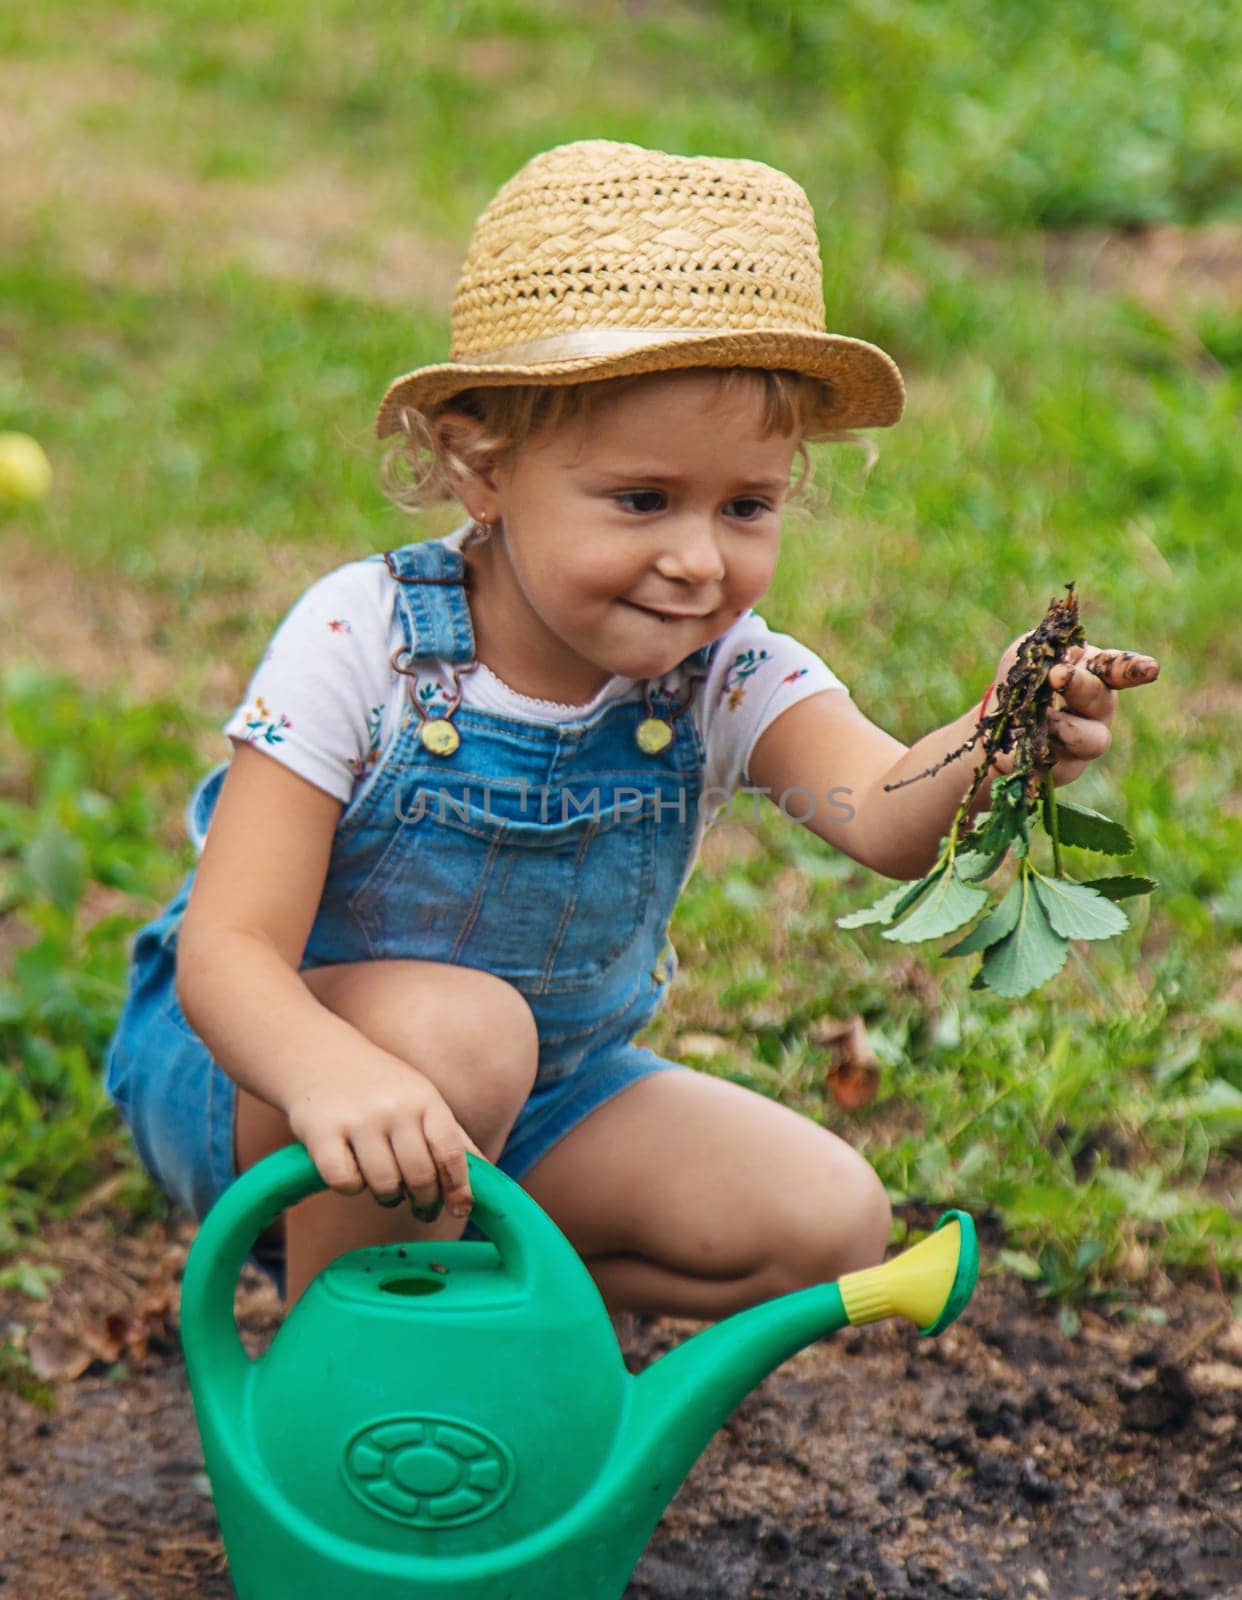 a child plants strawberries in the garden. Selective focus. by yanadjana